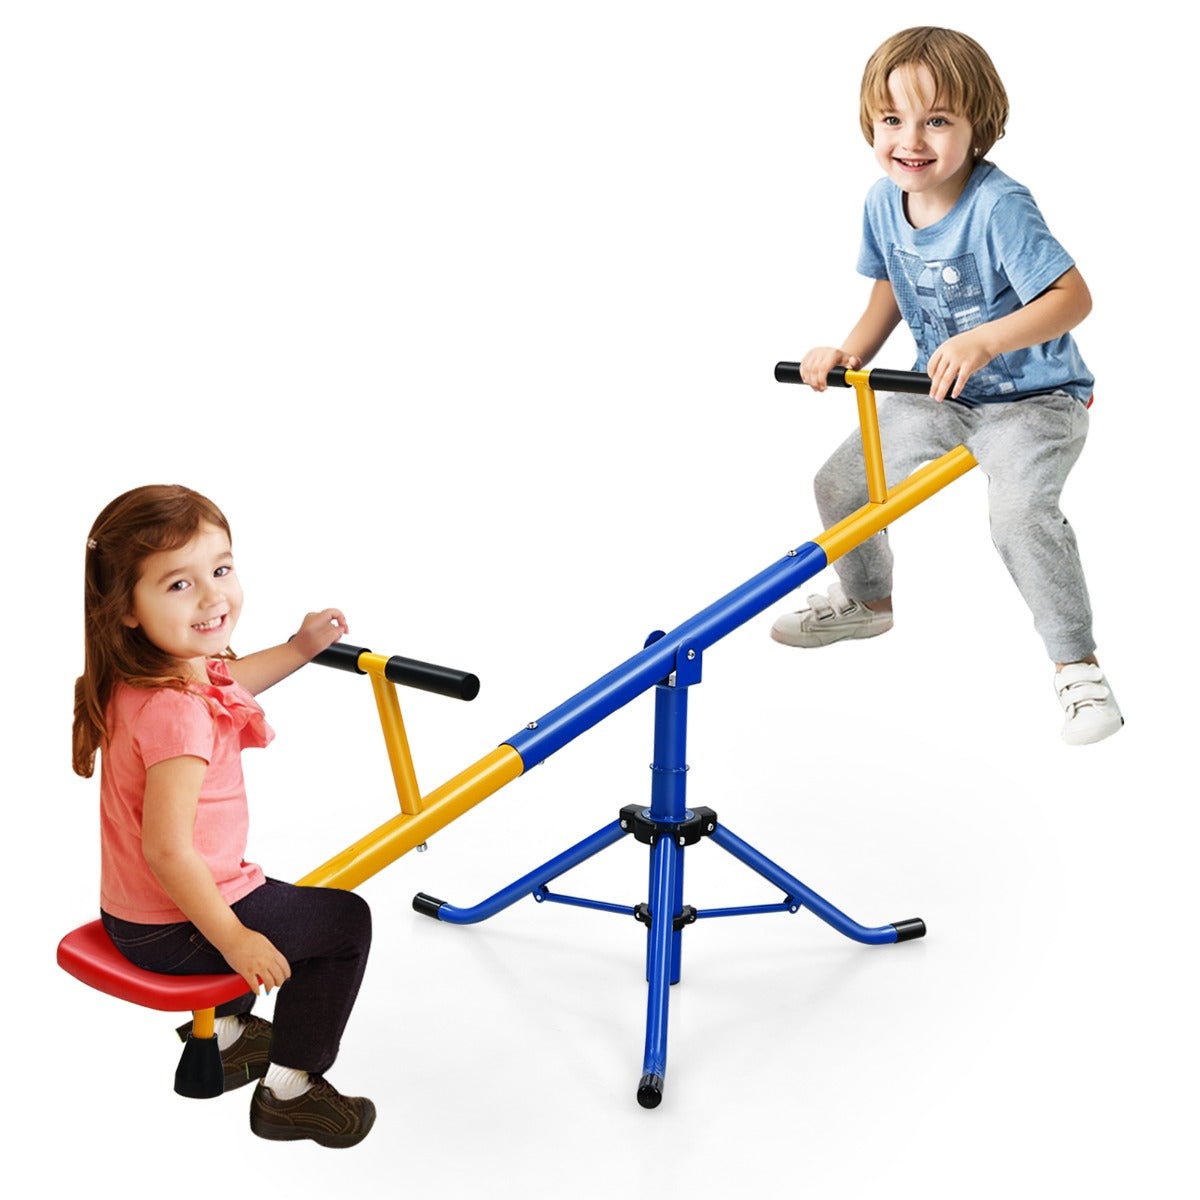 Spinning Seesaw: Hours of Fun for Kids